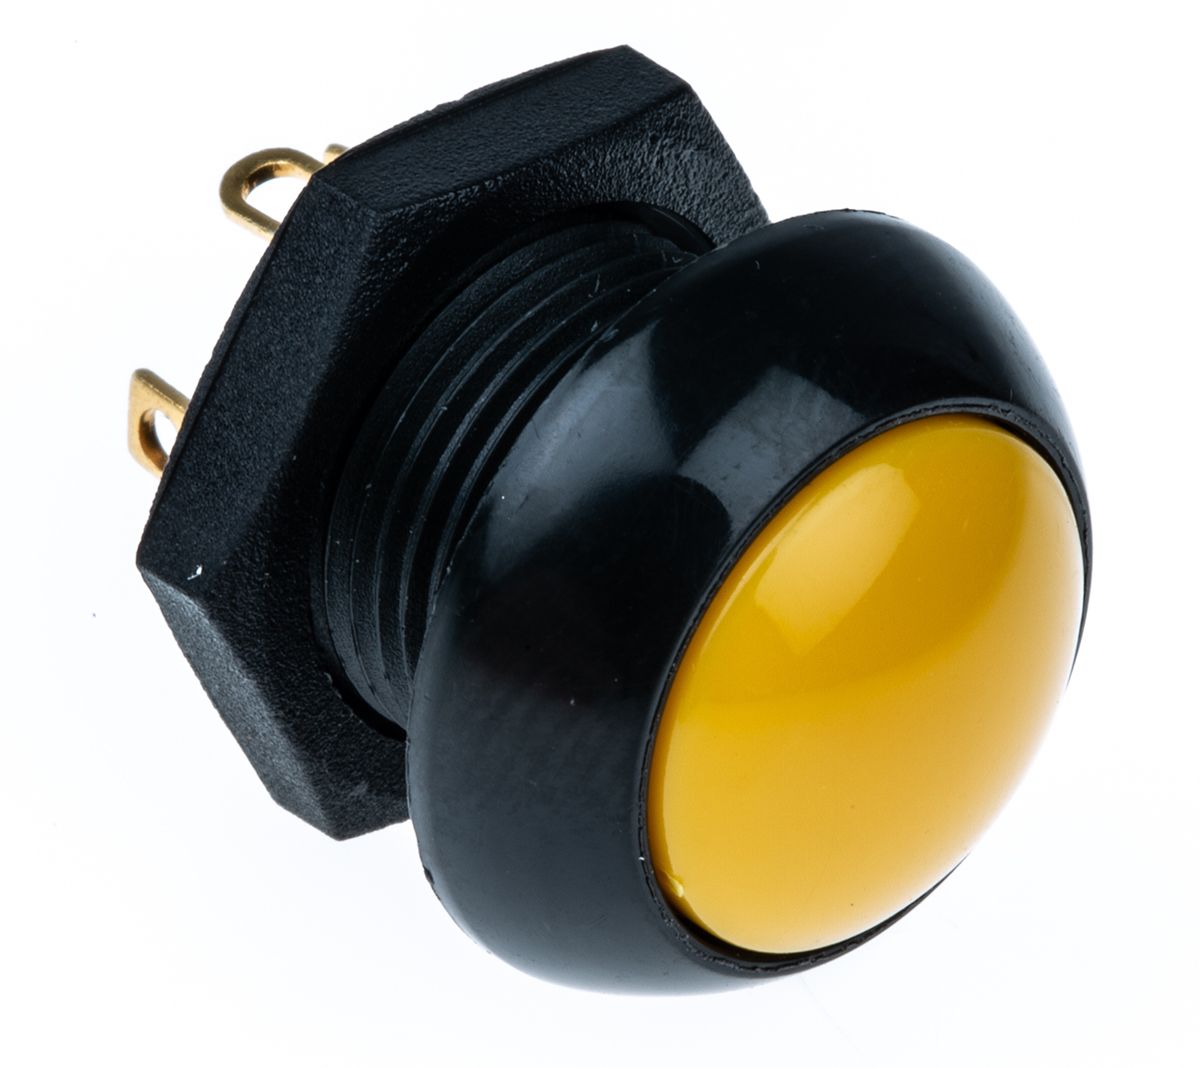 Otto Momentary Push Button Switch, Panel Mount, Double Pole Double Throw (DPDT)Double Pole Single Throw (DPST)